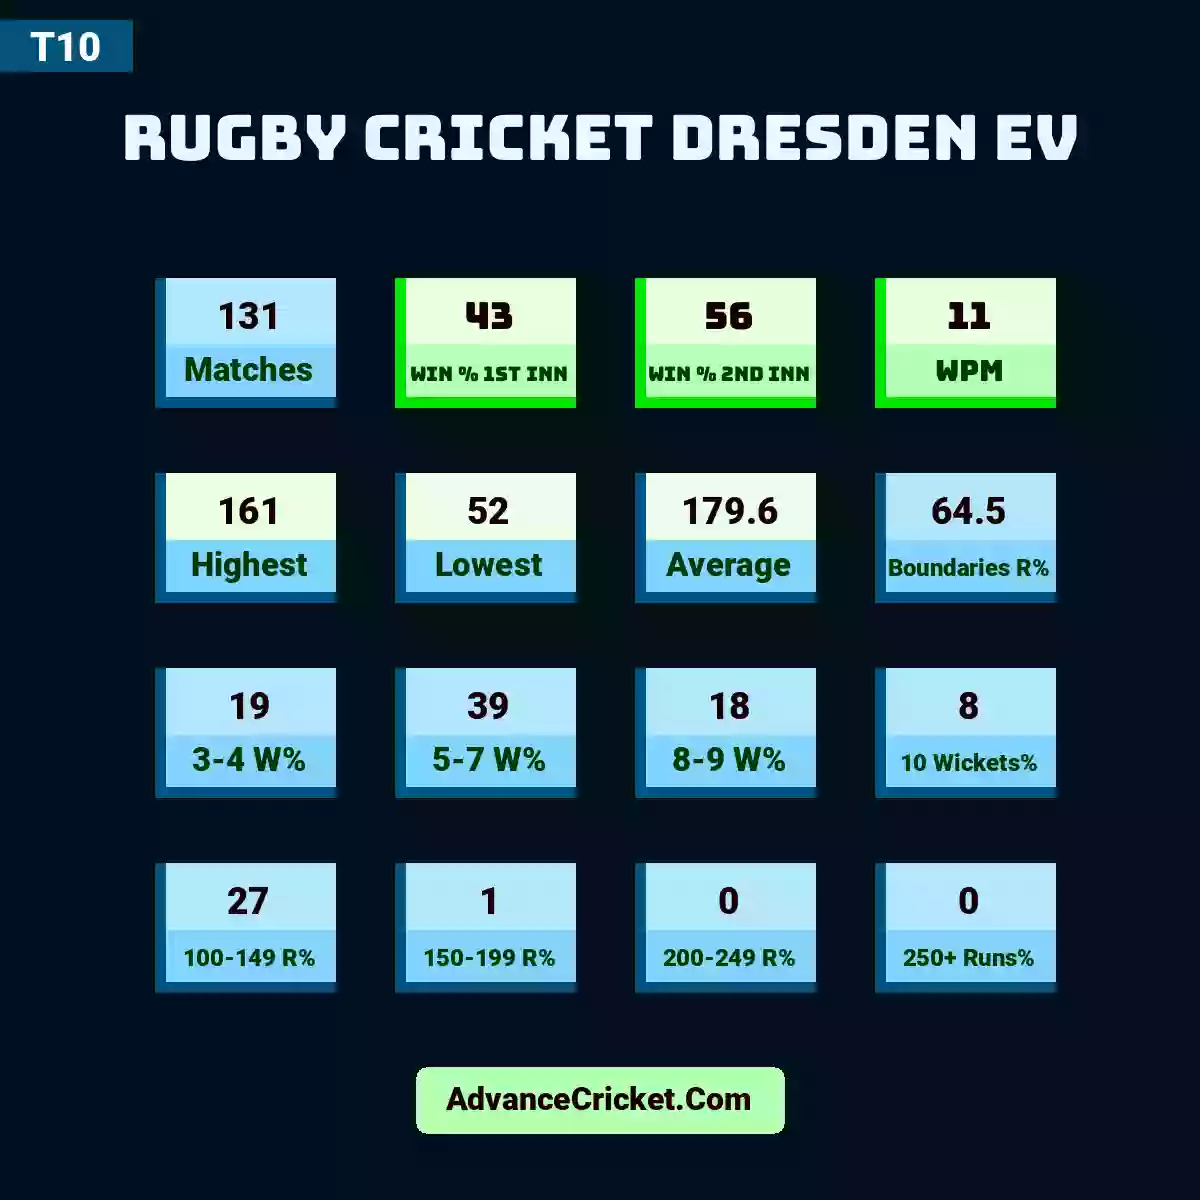 Image showing Rugby Cricket Dresden eV with Matches: 131, Win % 1st Inn: 43, Win % 2nd Inn: 56, WPM: 11, Highest: 161, Lowest: 52, Average: 179.6, Boundaries R%: 64.5, 3-4 W%: 19, 5-7 W%: 39, 8-9 W%: 18, 10 Wickets%: 8, 100-149 R%: 27, 150-199 R%: 1, 200-249 R%: 0, 250+ Runs%: 0.